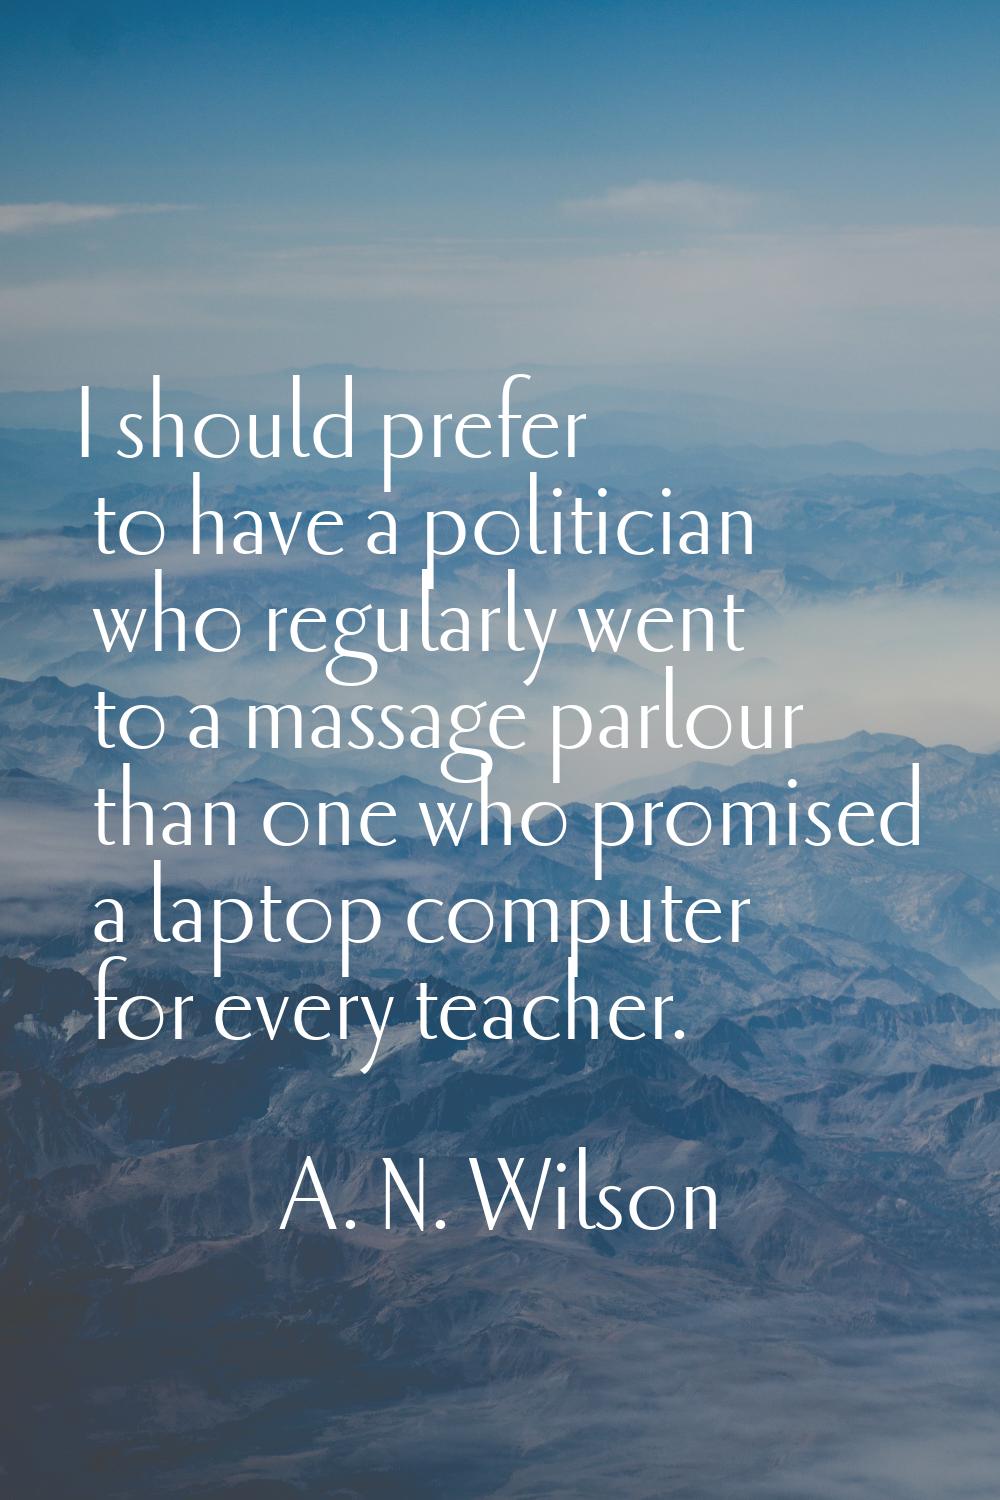 I should prefer to have a politician who regularly went to a massage parlour than one who promised 